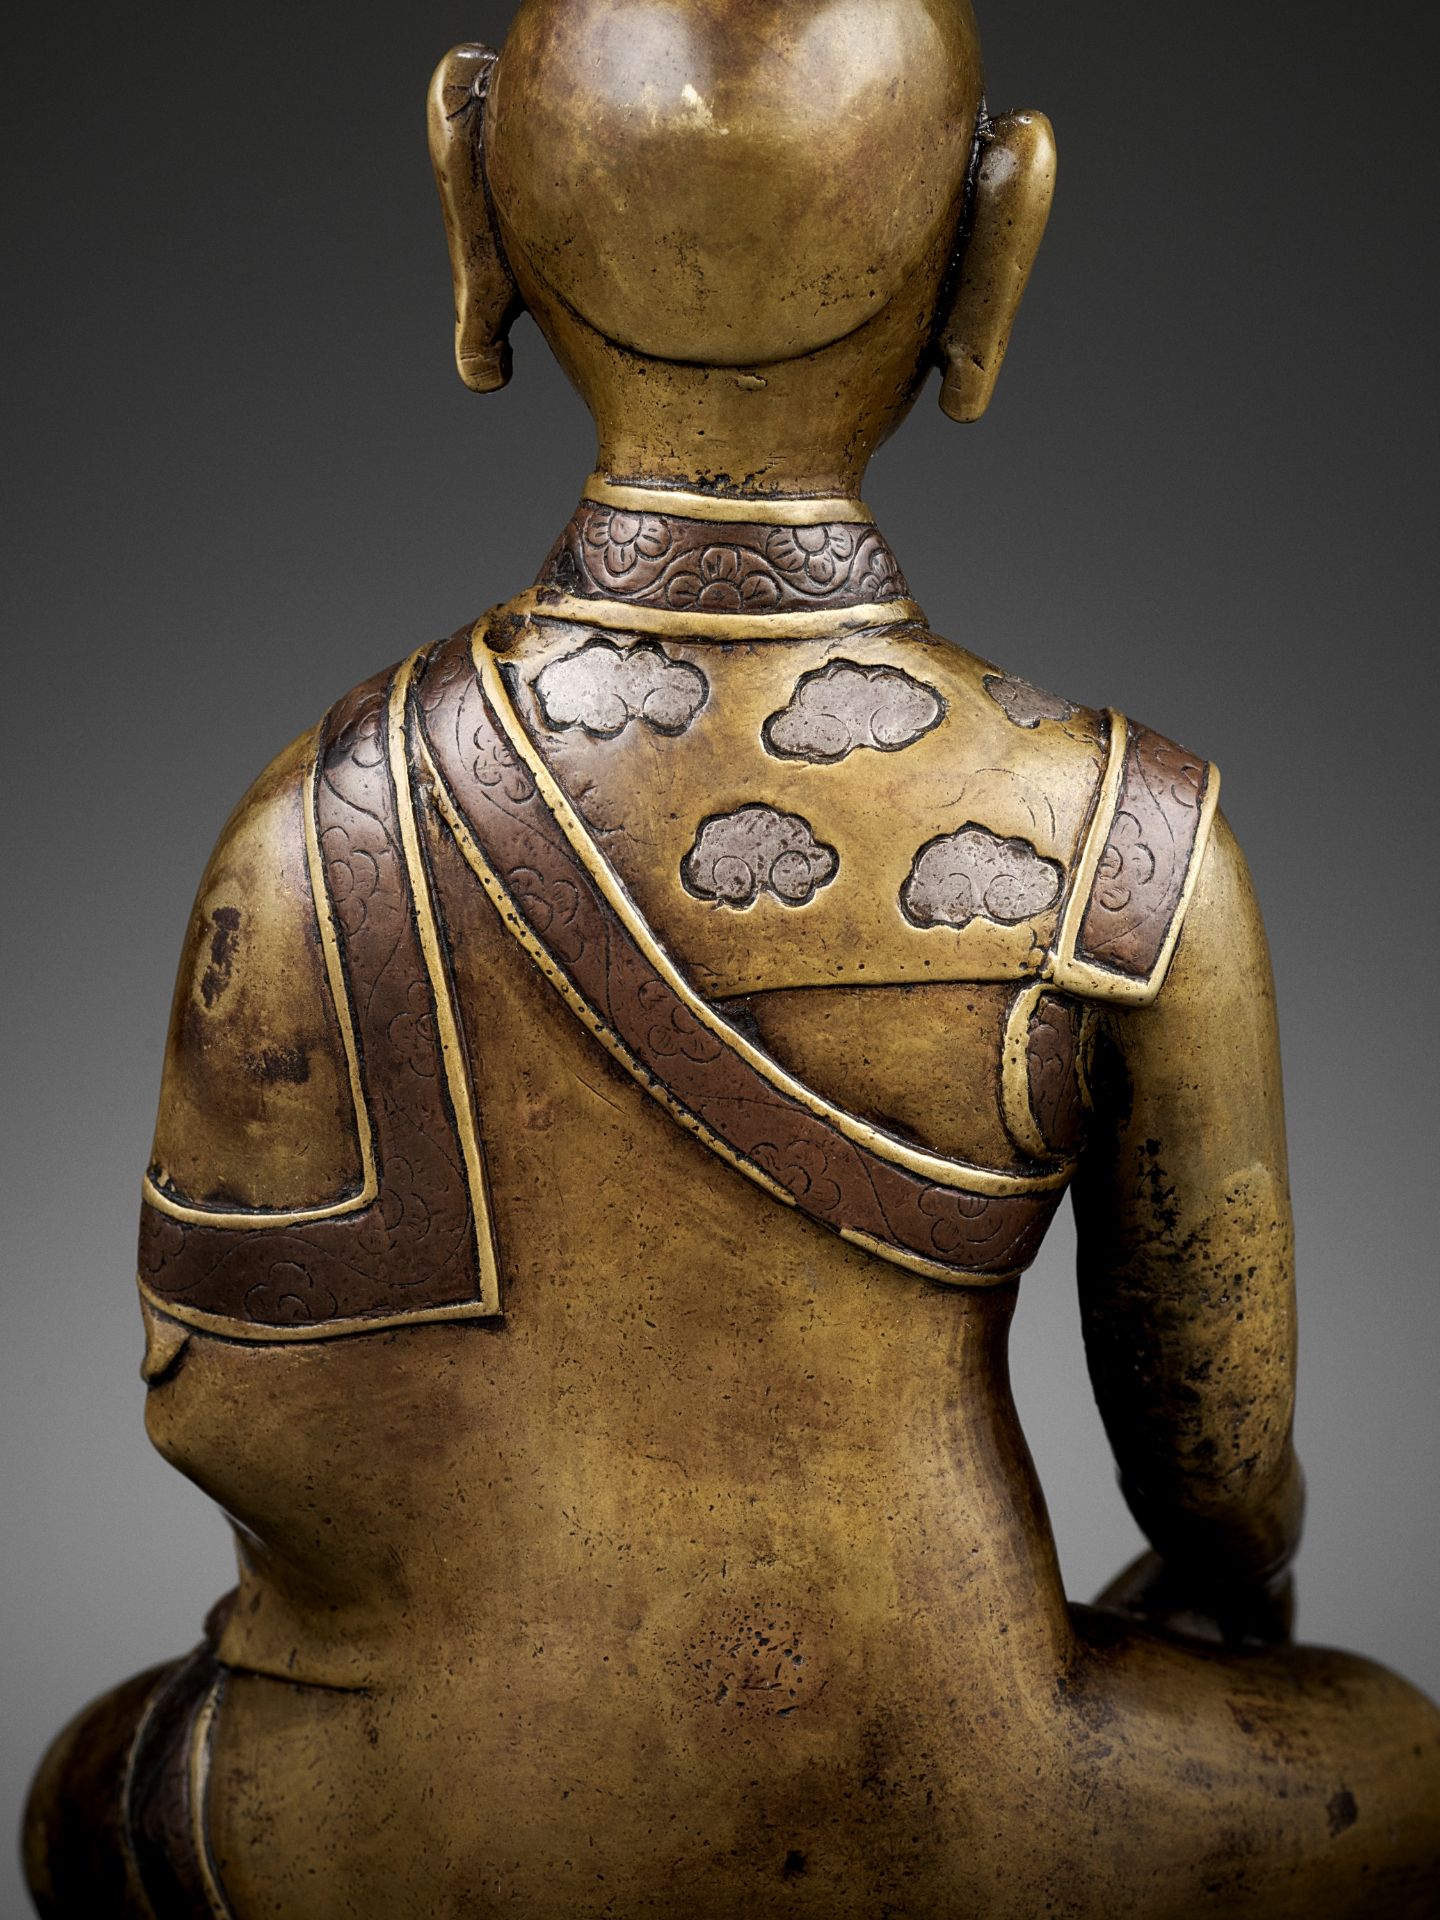 A PORTRAIT BRONZE OF A MONK, COPPER- AND SILVER-INLAID, 16TH-18TH CENTURY - Image 3 of 12